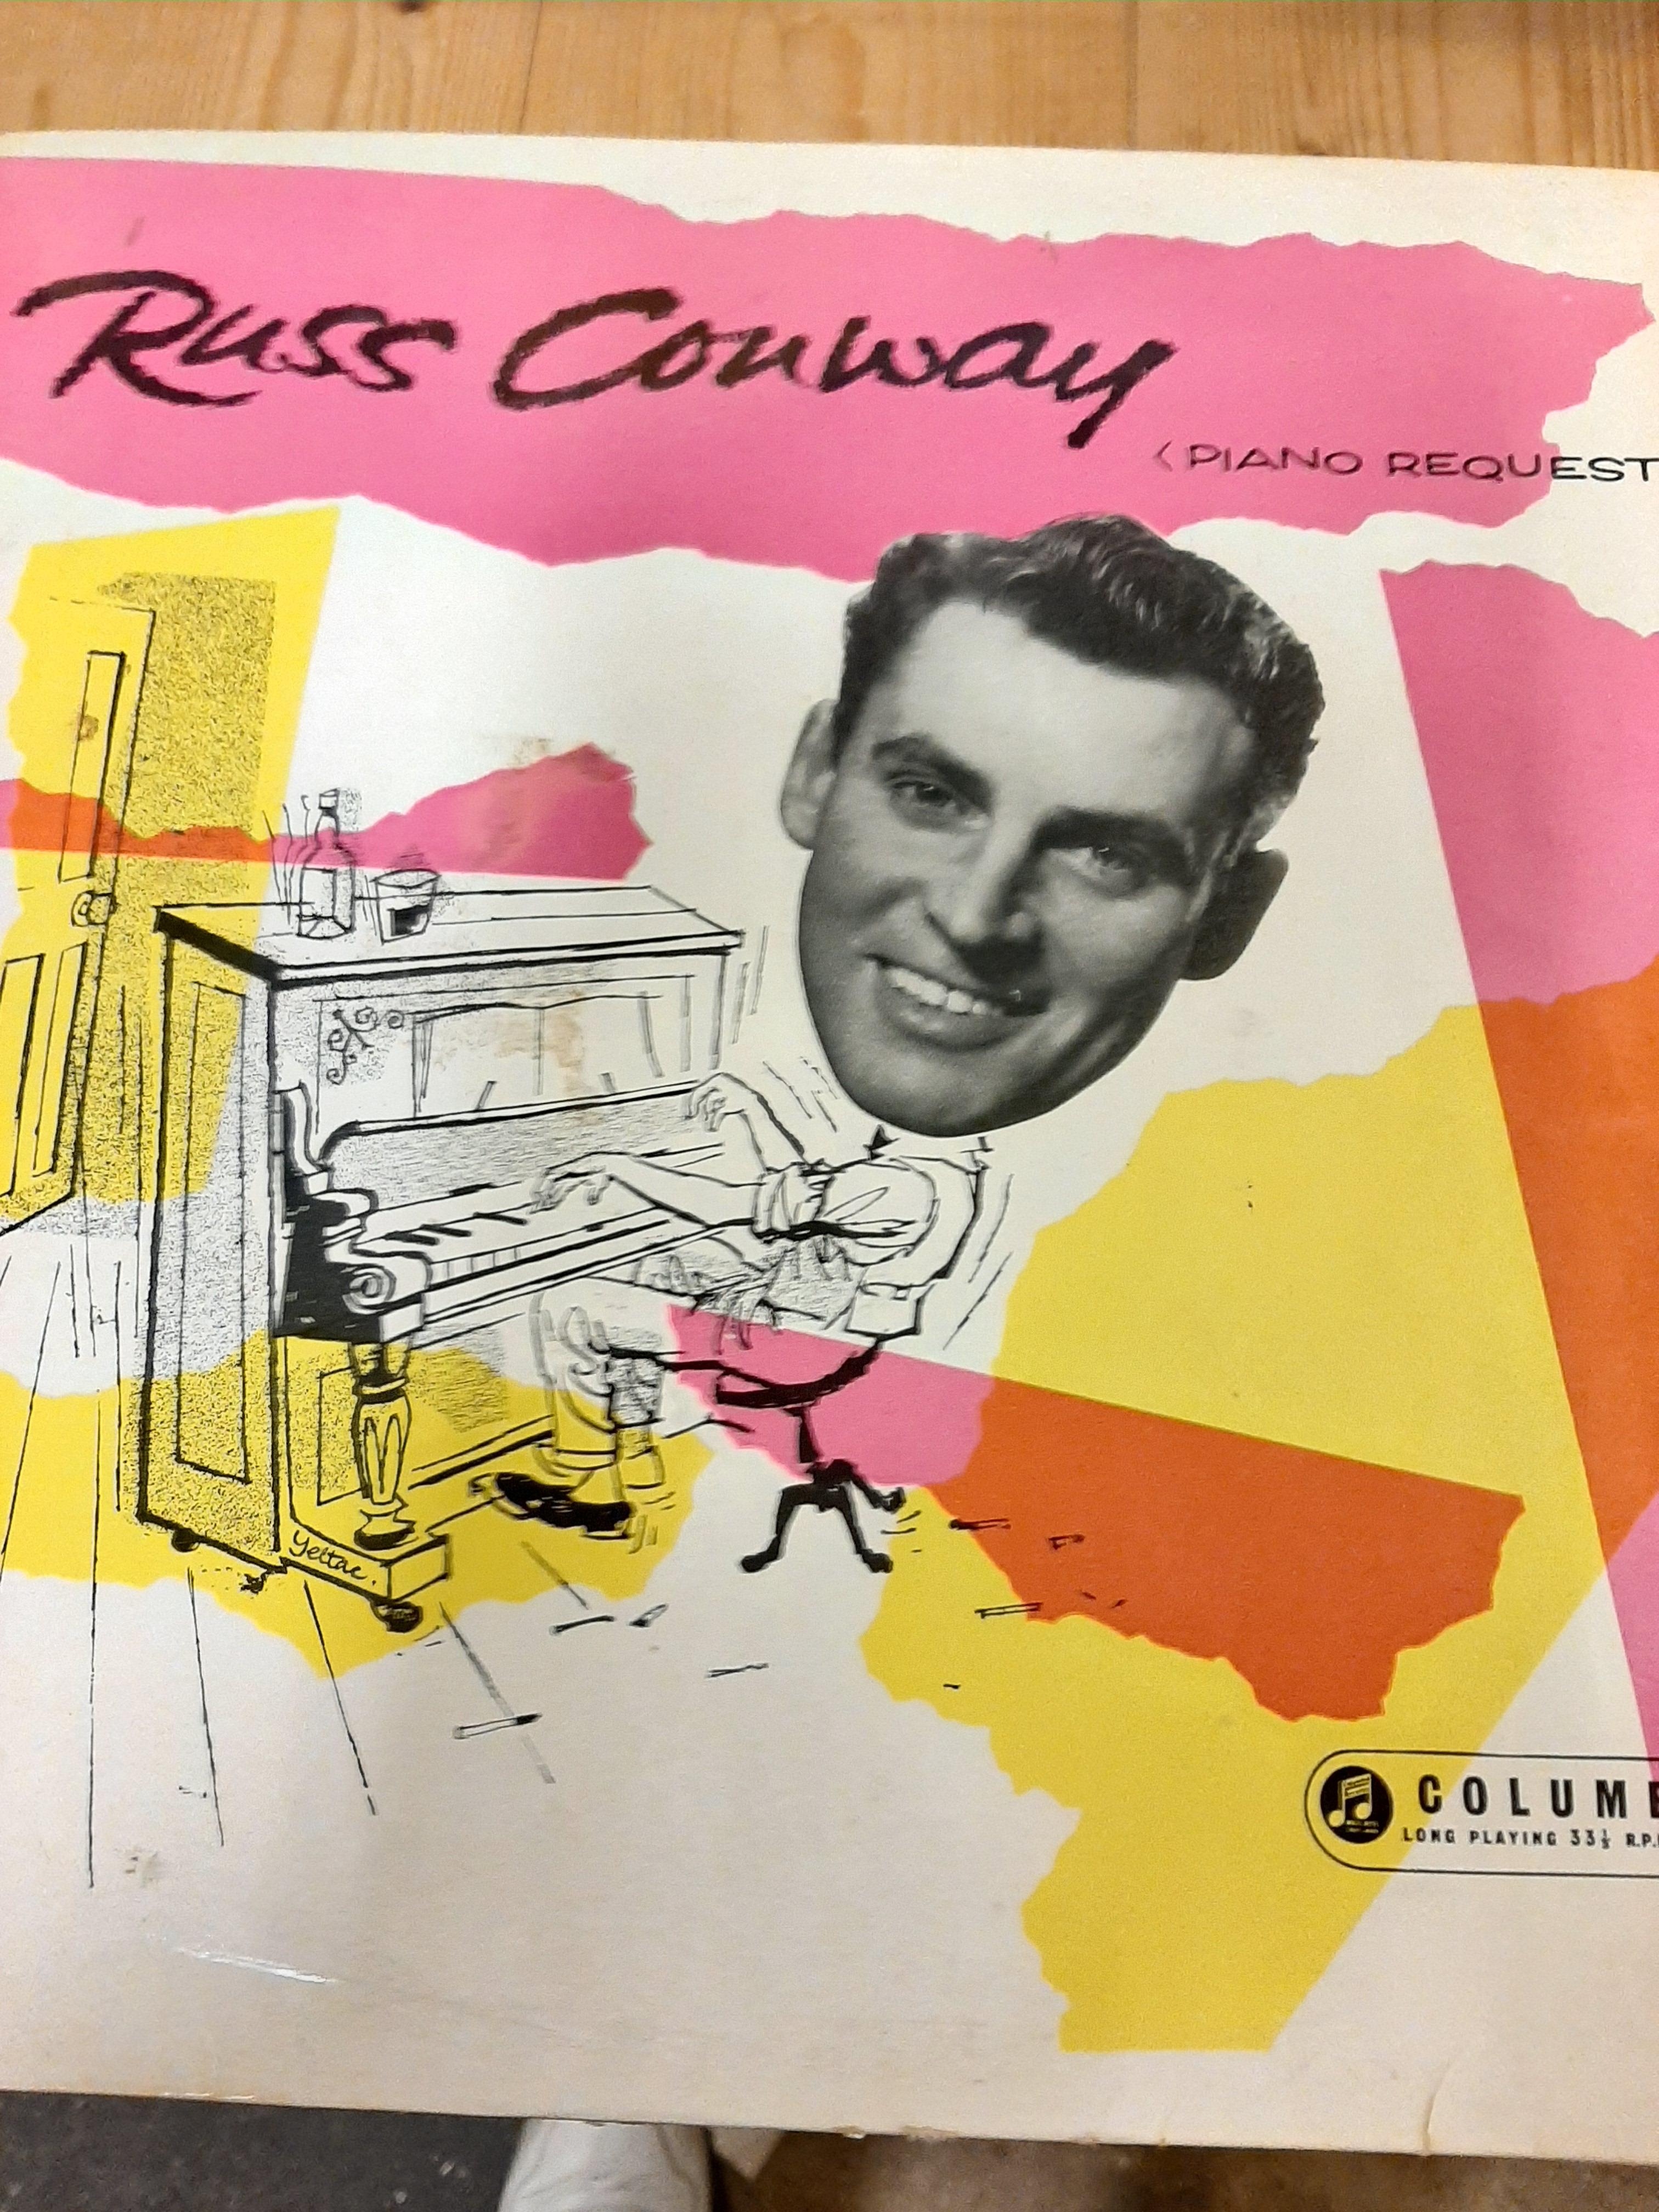 3 Vinyl Records: LPs, viz Russ Conway "Piano Requests", Jim Reeves "12 Songs of Chriostmas" and " - Image 2 of 4